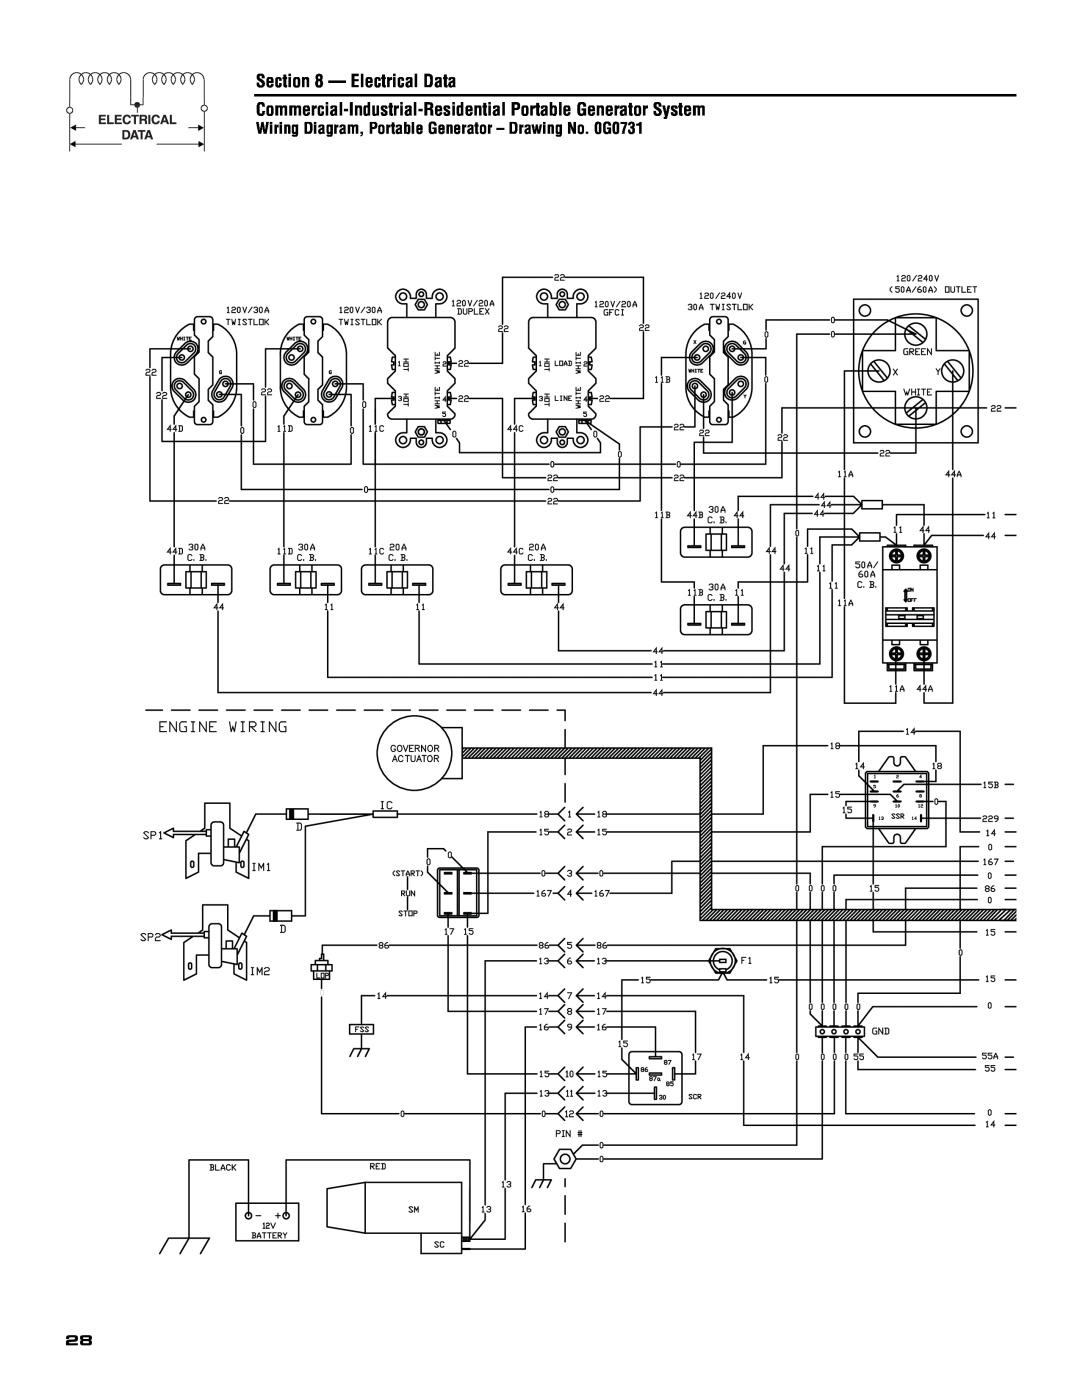 Generac 005308-0 owner manual Electrical Data, Commercial-Industrial-Residential Portable Generator System, Engine Wiring 